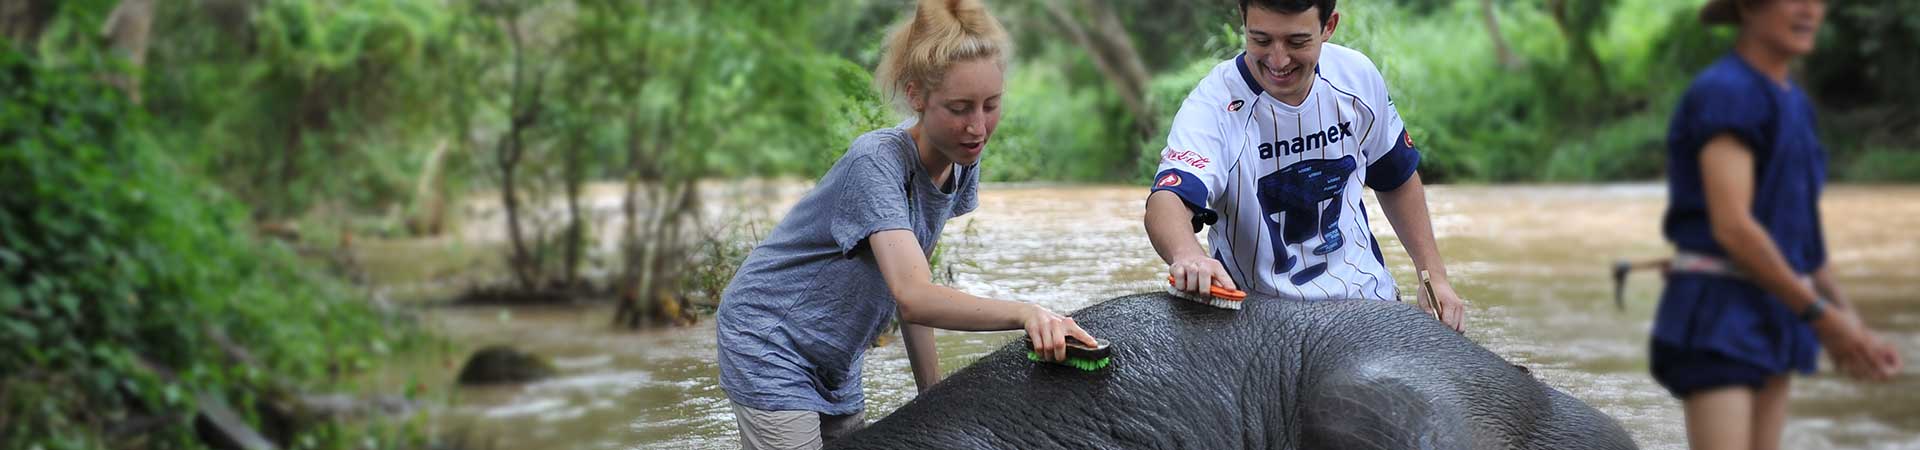 Volunteer with Elephants in Thailand - Chiang Mai